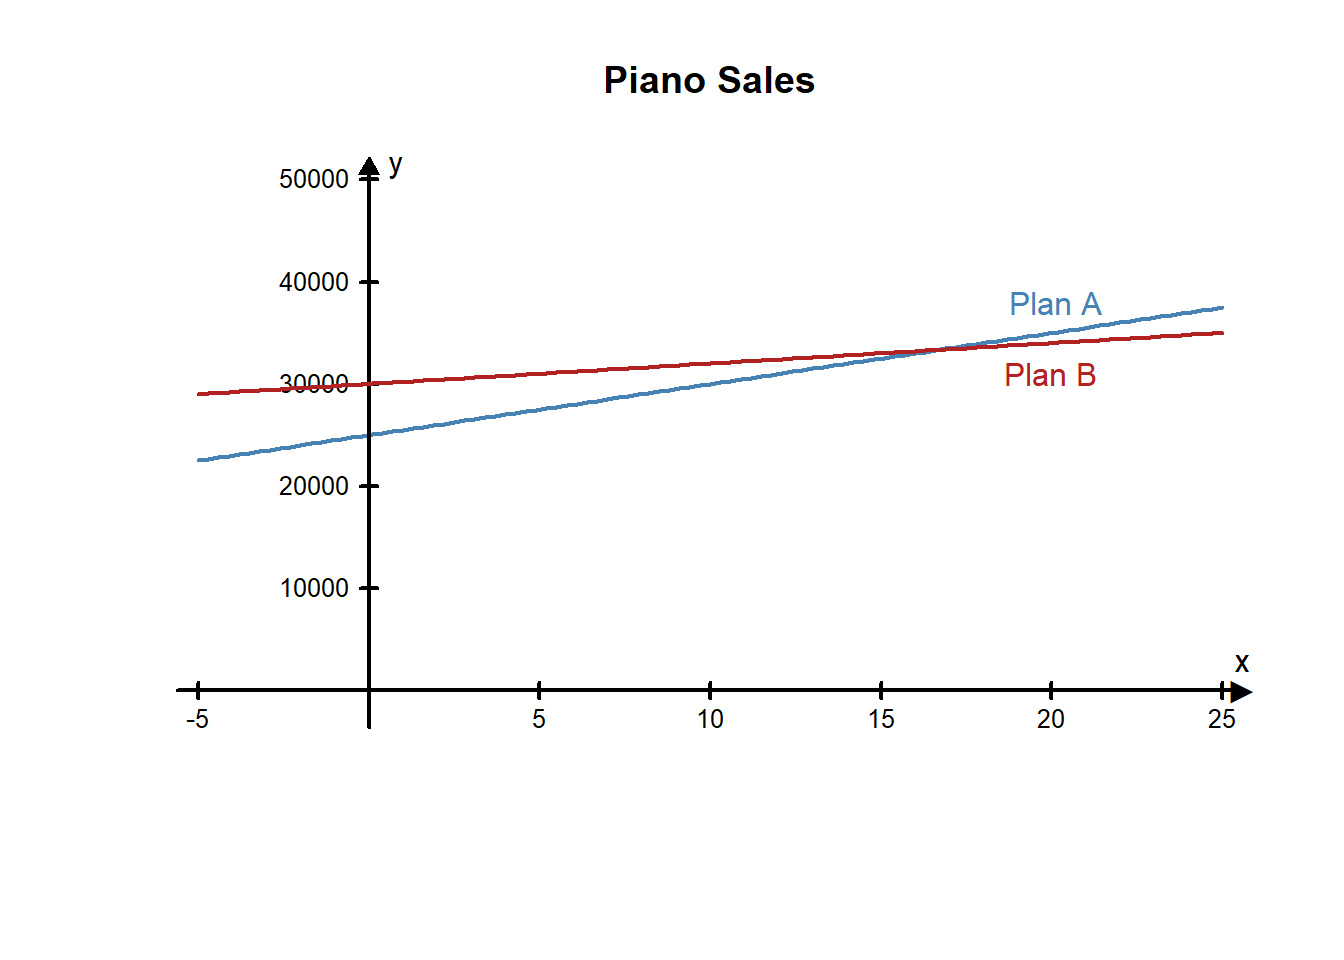 Graph of Piano Sales, Plan A and Plan B